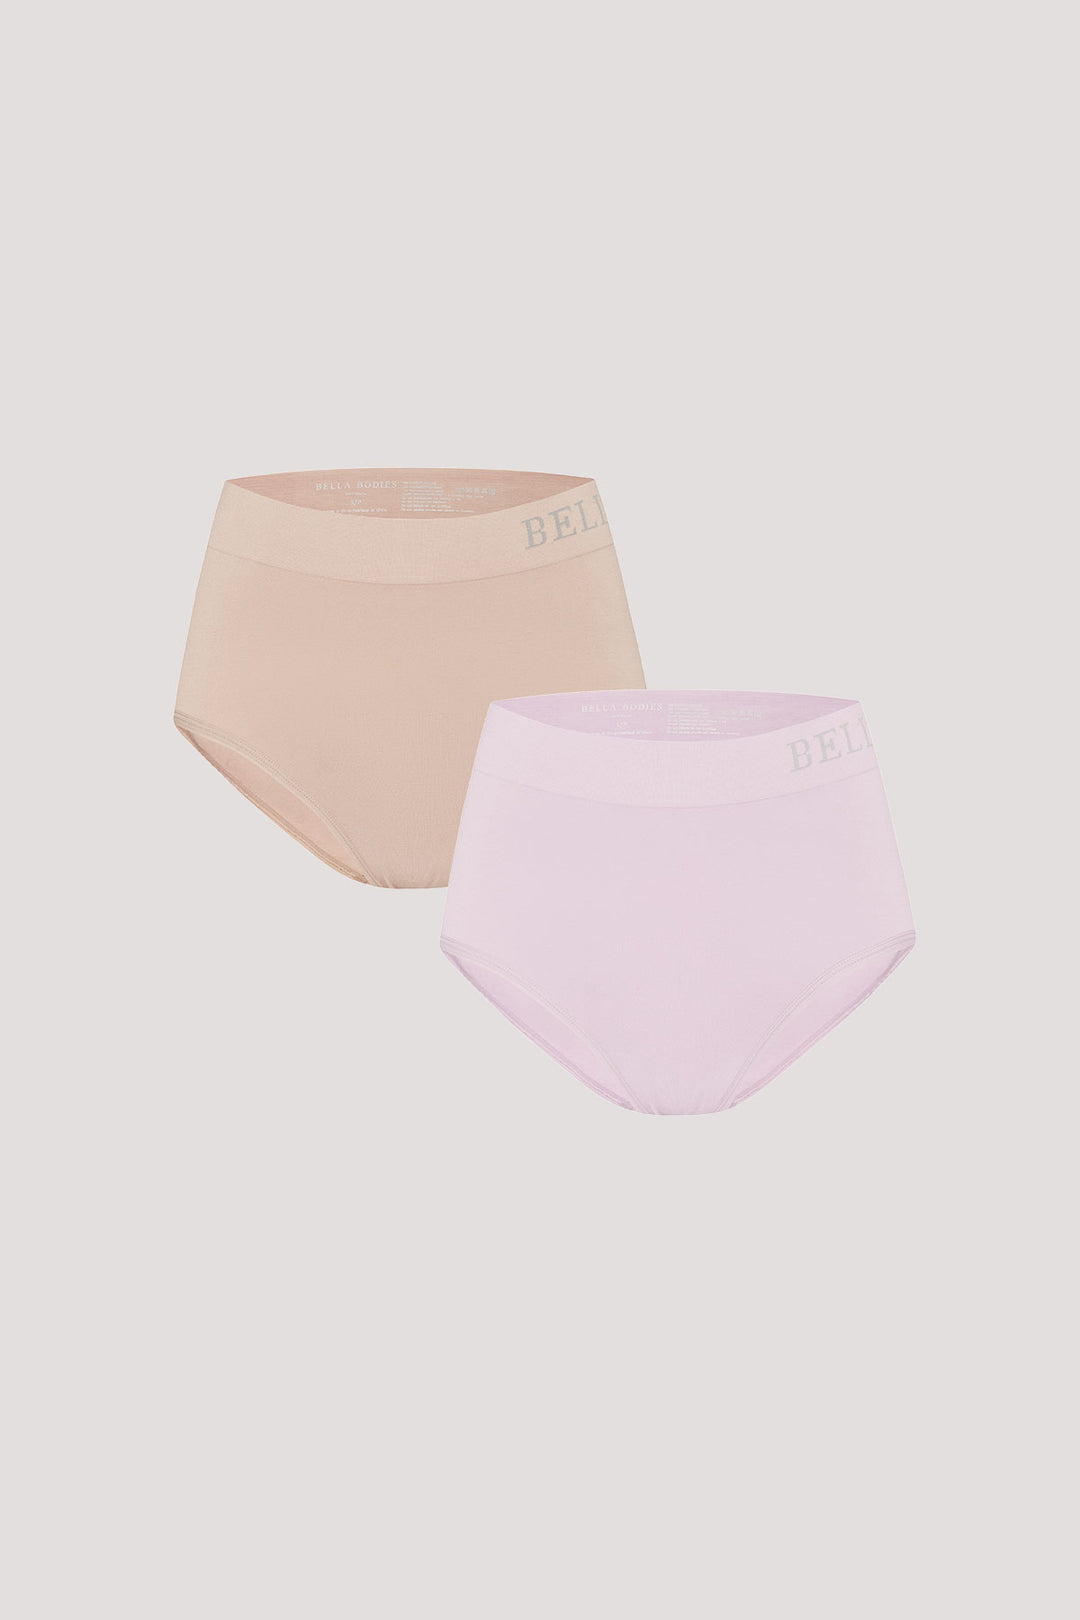 Eco-friendly High Waist Breathable Bamboo Underwear | Double pack | Bella Bodies UK | Sand and Soft Lilac